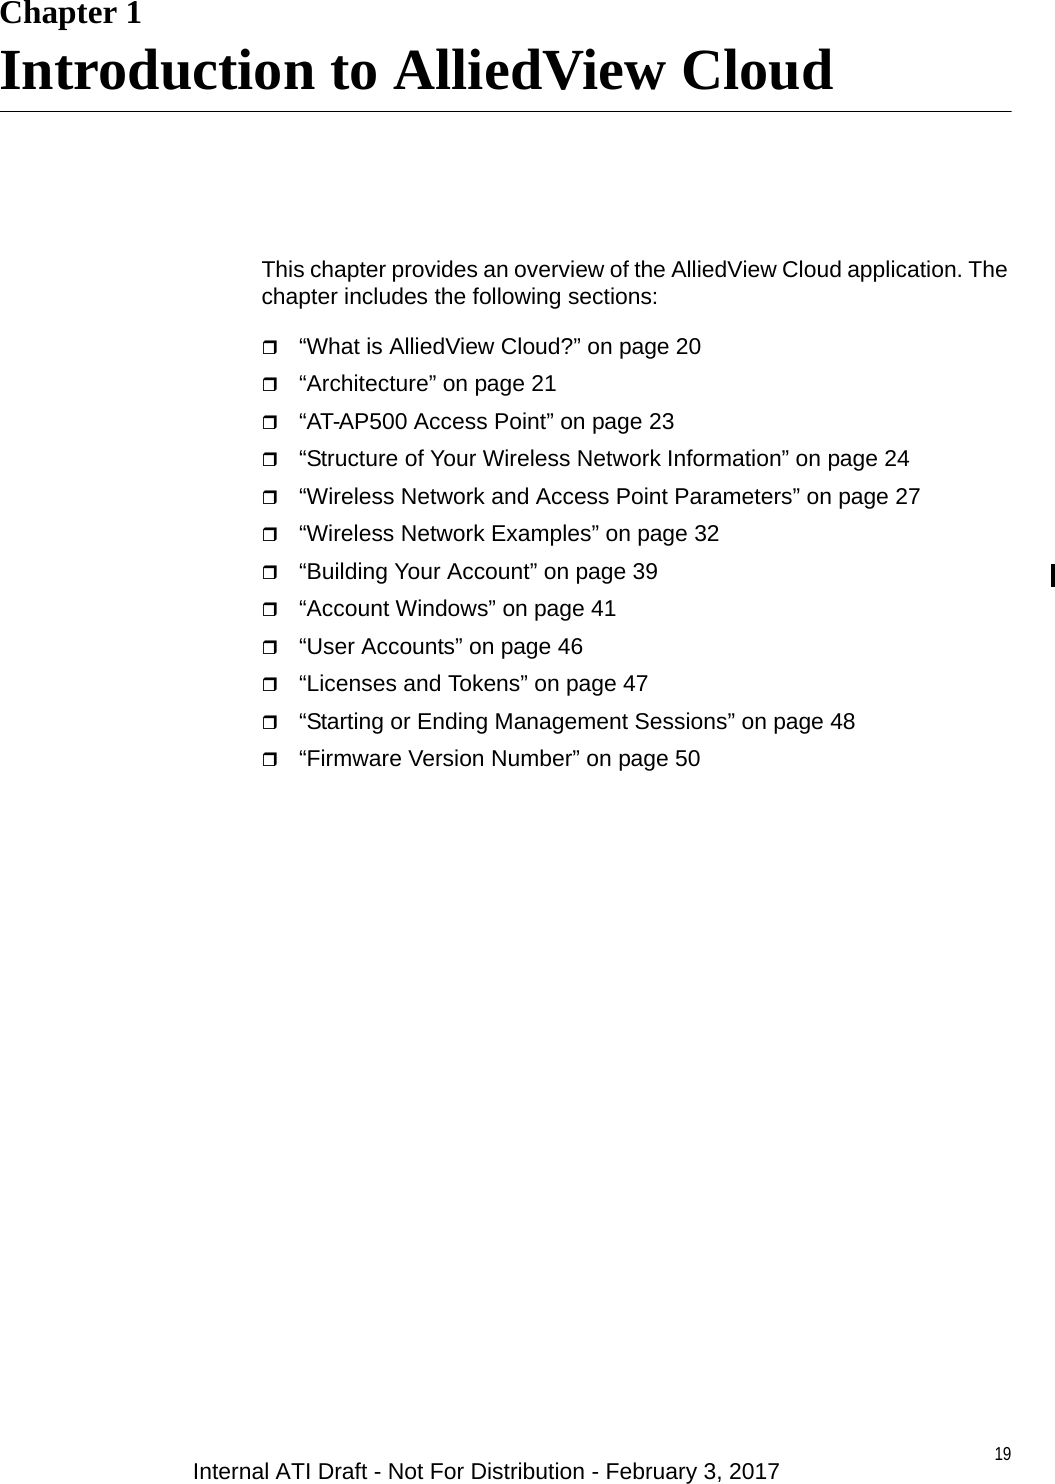 19Chapter 1Introduction to AlliedView CloudThis chapter provides an overview of the AlliedView Cloud application. The chapter includes the following sections:“What is AlliedView Cloud?” on page 20“Architecture” on page 21“AT-AP500 Access Point” on page 23“Structure of Your Wireless Network Information” on page 24“Wireless Network and Access Point Parameters” on page 27“Wireless Network Examples” on page 32“Building Your Account” on page 39“Account Windows” on page 41“User Accounts” on page 46“Licenses and Tokens” on page 47“Starting or Ending Management Sessions” on page 48“Firmware Version Number” on page 50Internal ATI Draft - Not For Distribution - February 3, 2017